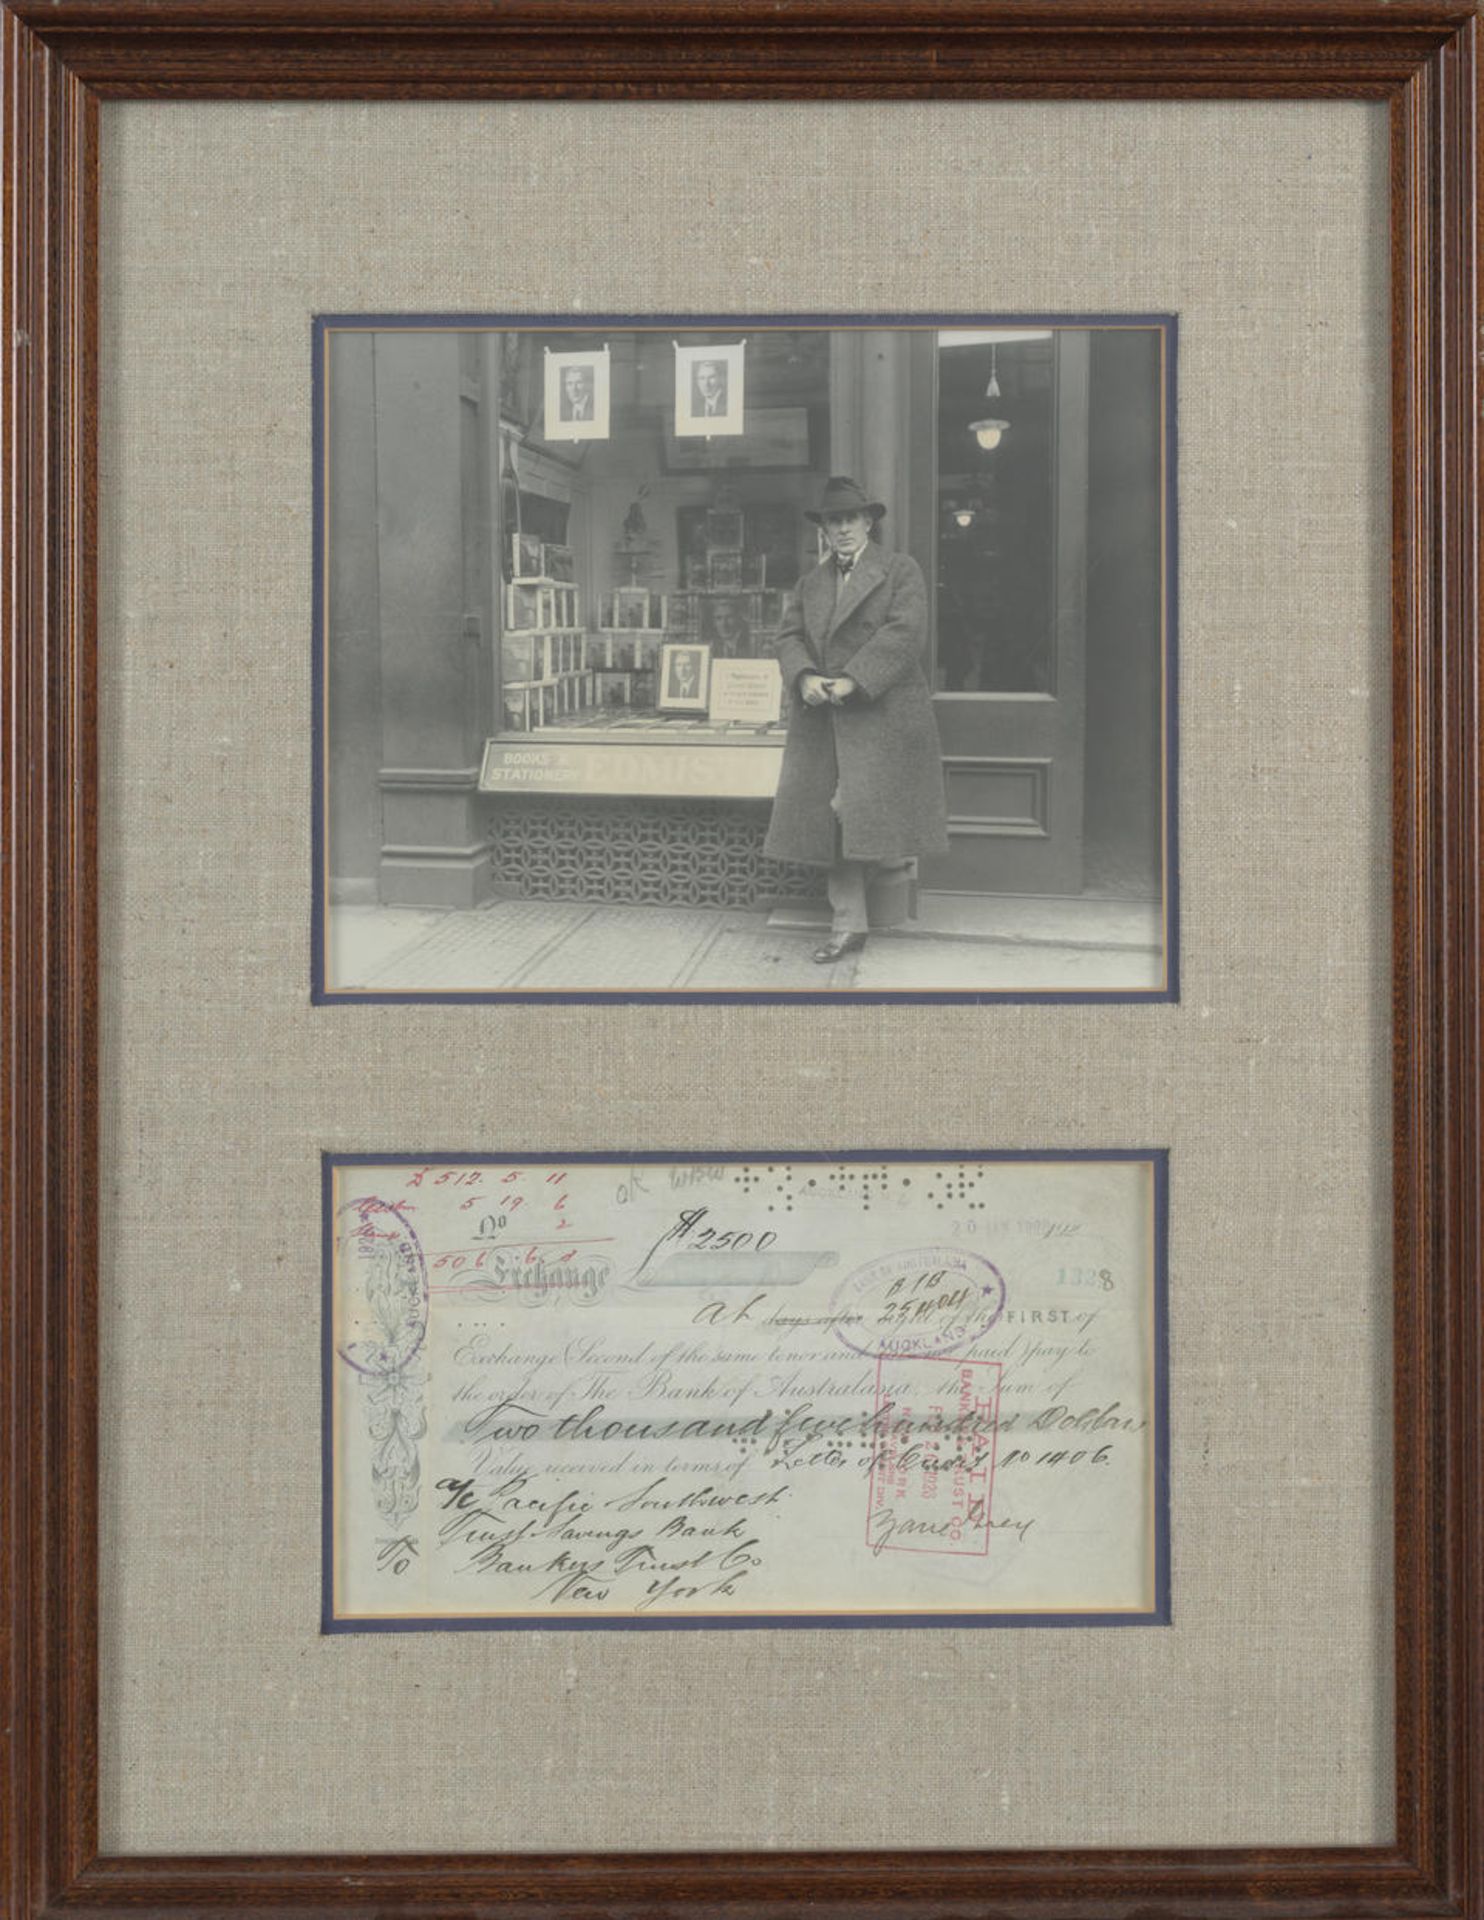 GREY, ZANE. 1872-1939. Bank Draft Signed, in the amount of $2,500 drawn on the Bank of Australasia,